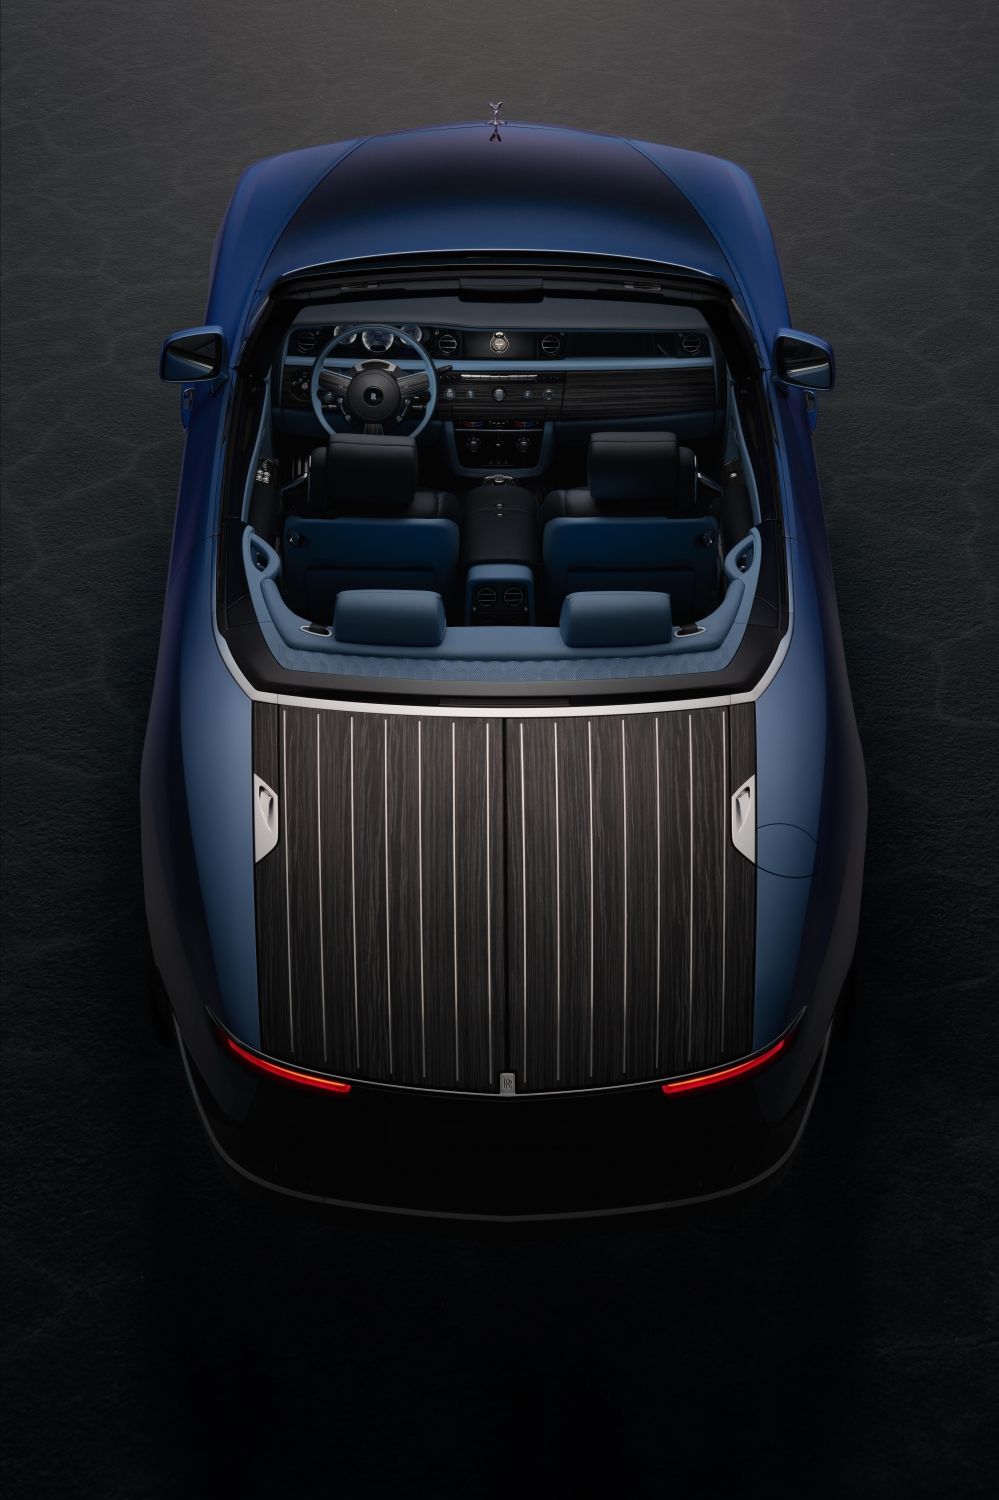 Rolls Royce has built the world's most expensive new car - The $29 million  19-Foot convertible has a mechanized rear deck that transforms into a  picnic set. It may have been commissioned